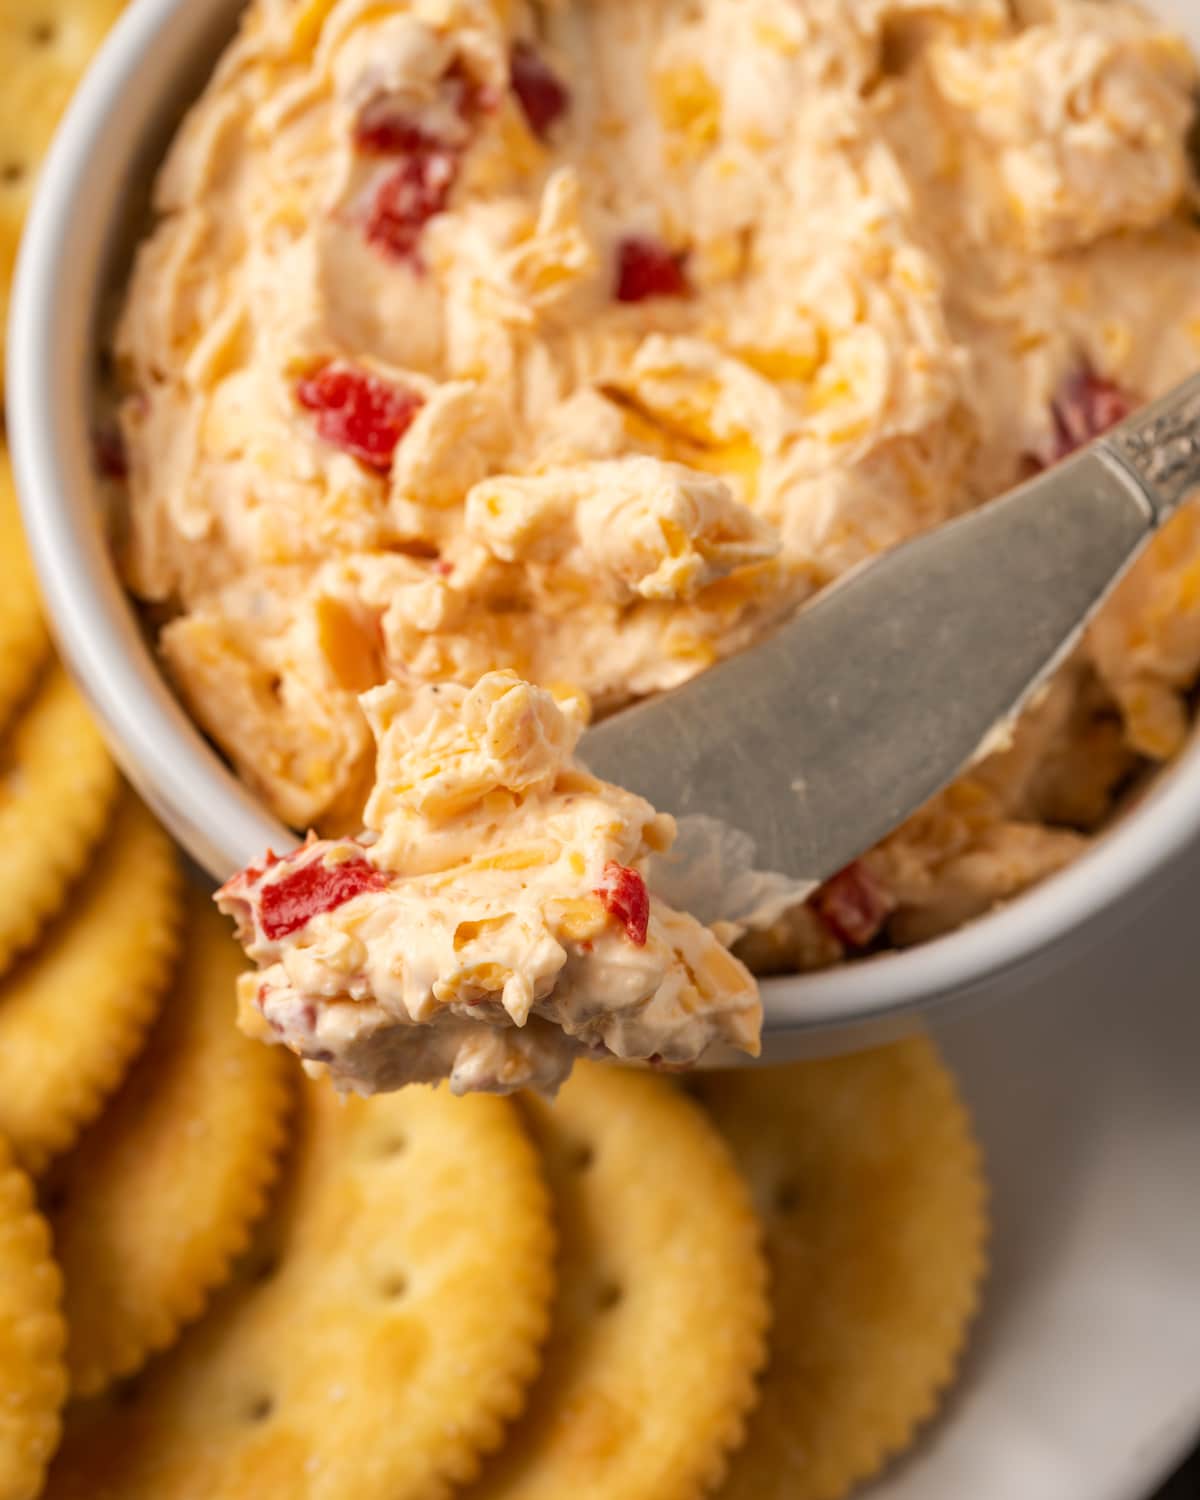 A close up of a bowl of pimento cheese with a cheese knife on a platter of crackers.